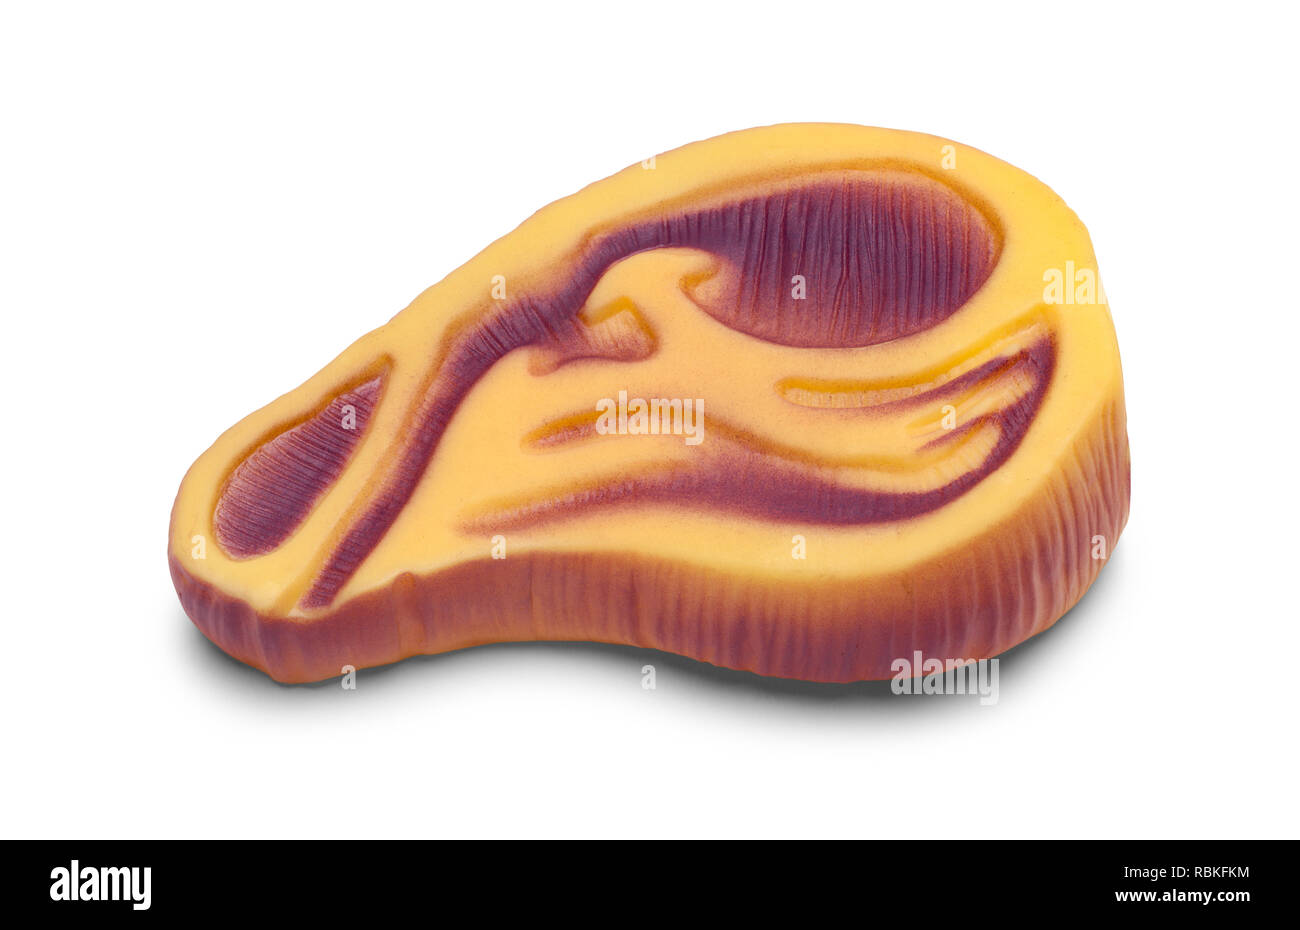 Rubber Steak Toy Isolated on White Background. Stock Photo